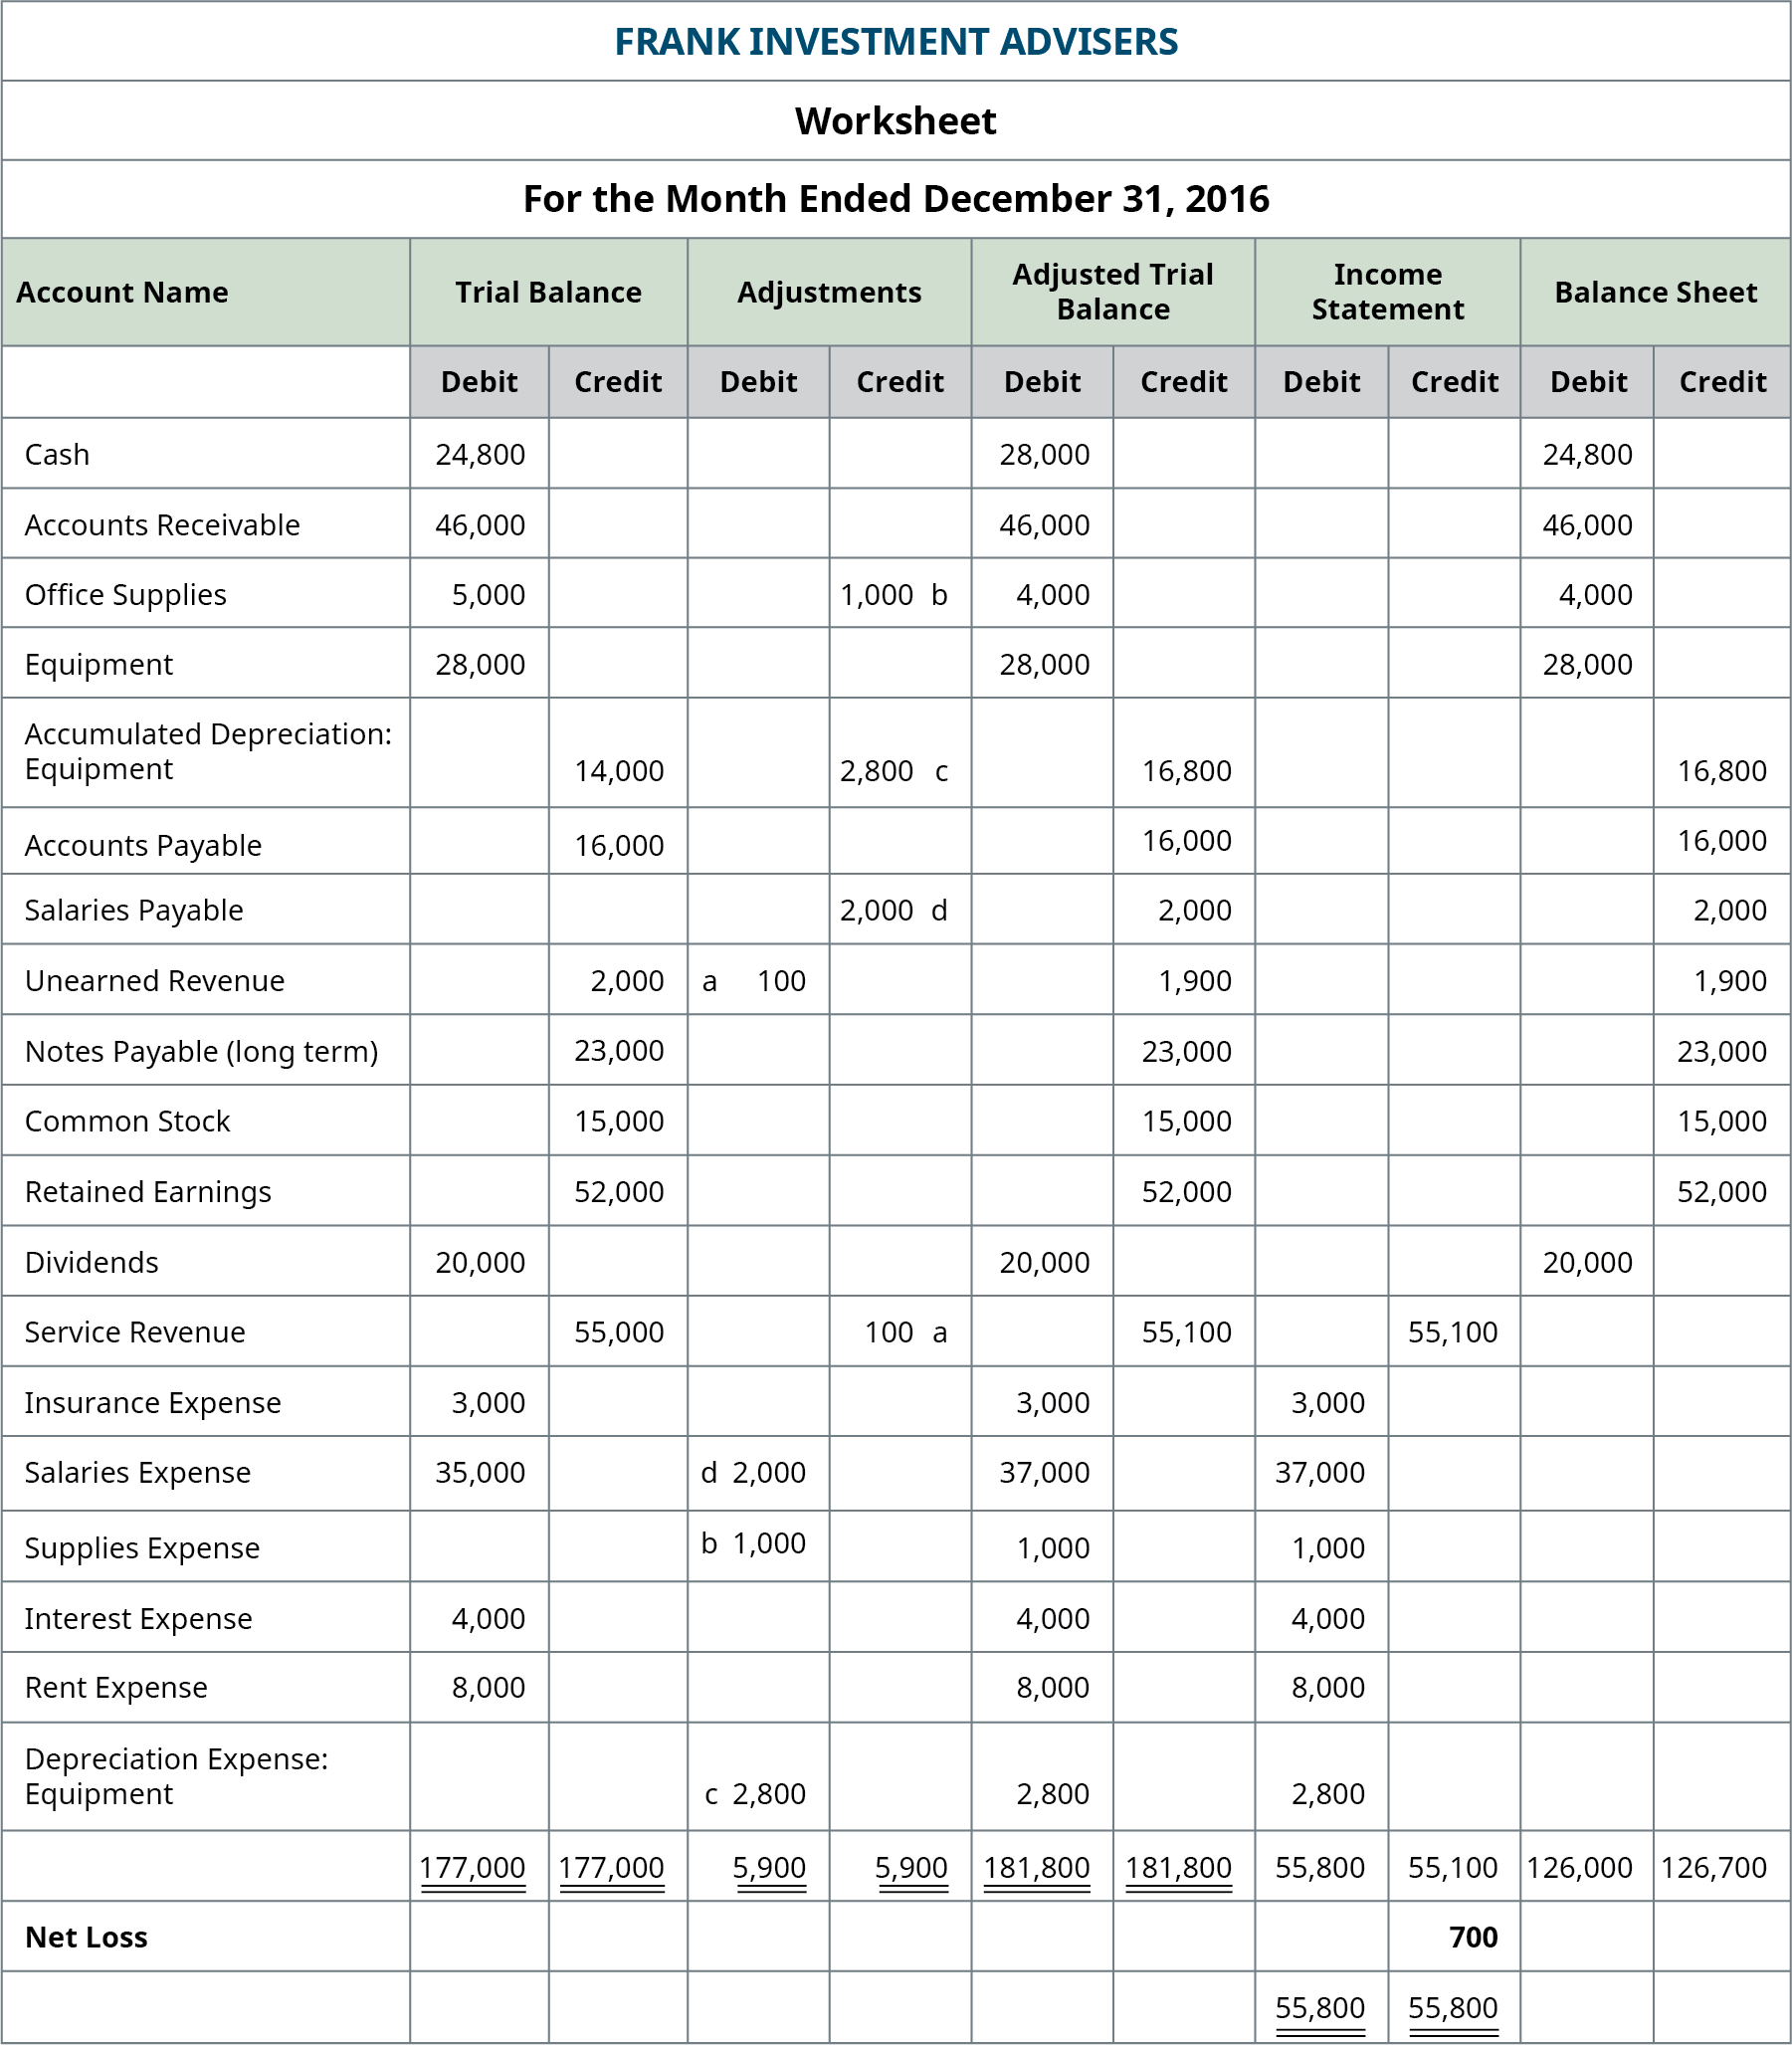 Frank Investment Advisers, Worksheet, December 31, 2016. Income Statement columns. Debit column: Insurance expense 3,000; Salaries expense 37,000, Supplies expense 1,000; Interest expense 4,000; Rent expense 8,000; Depreciation expense: equipment 2,800; total debit column 55,800. Credit column: Service revenue 55,100; total credit column 55,100; Net Loss 700. Balance Sheet columns. Debit column: Cash 28,000; Accounts receivable 46,000; Office supplies 4,000; Equipment 28,000; Dividends 20,000; total debit column 126,000. Credit column: Accumulated depreciation: equipment 16,800; Accounts payable 16,000; Salaries payable 2,000; Unearned revenue 1,900; Notes Payable (long term) 23,000; Common stock 15,000; Retained earnings 52,000; total credit column 126,700.